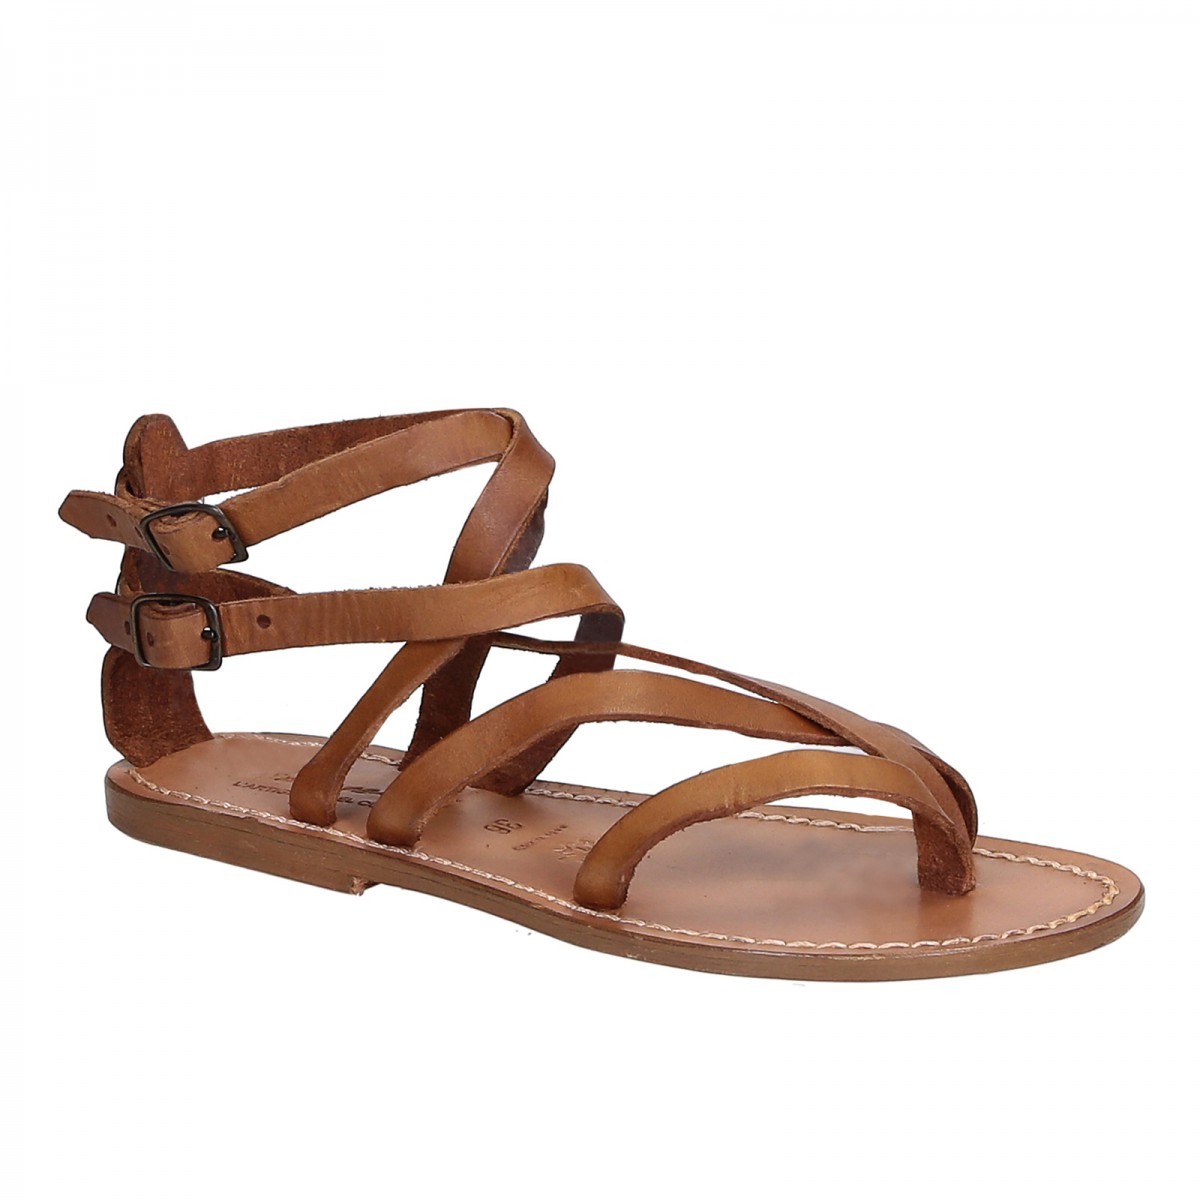 Handmade women's flat sandals in tan leather | Gianluca - The leather ...